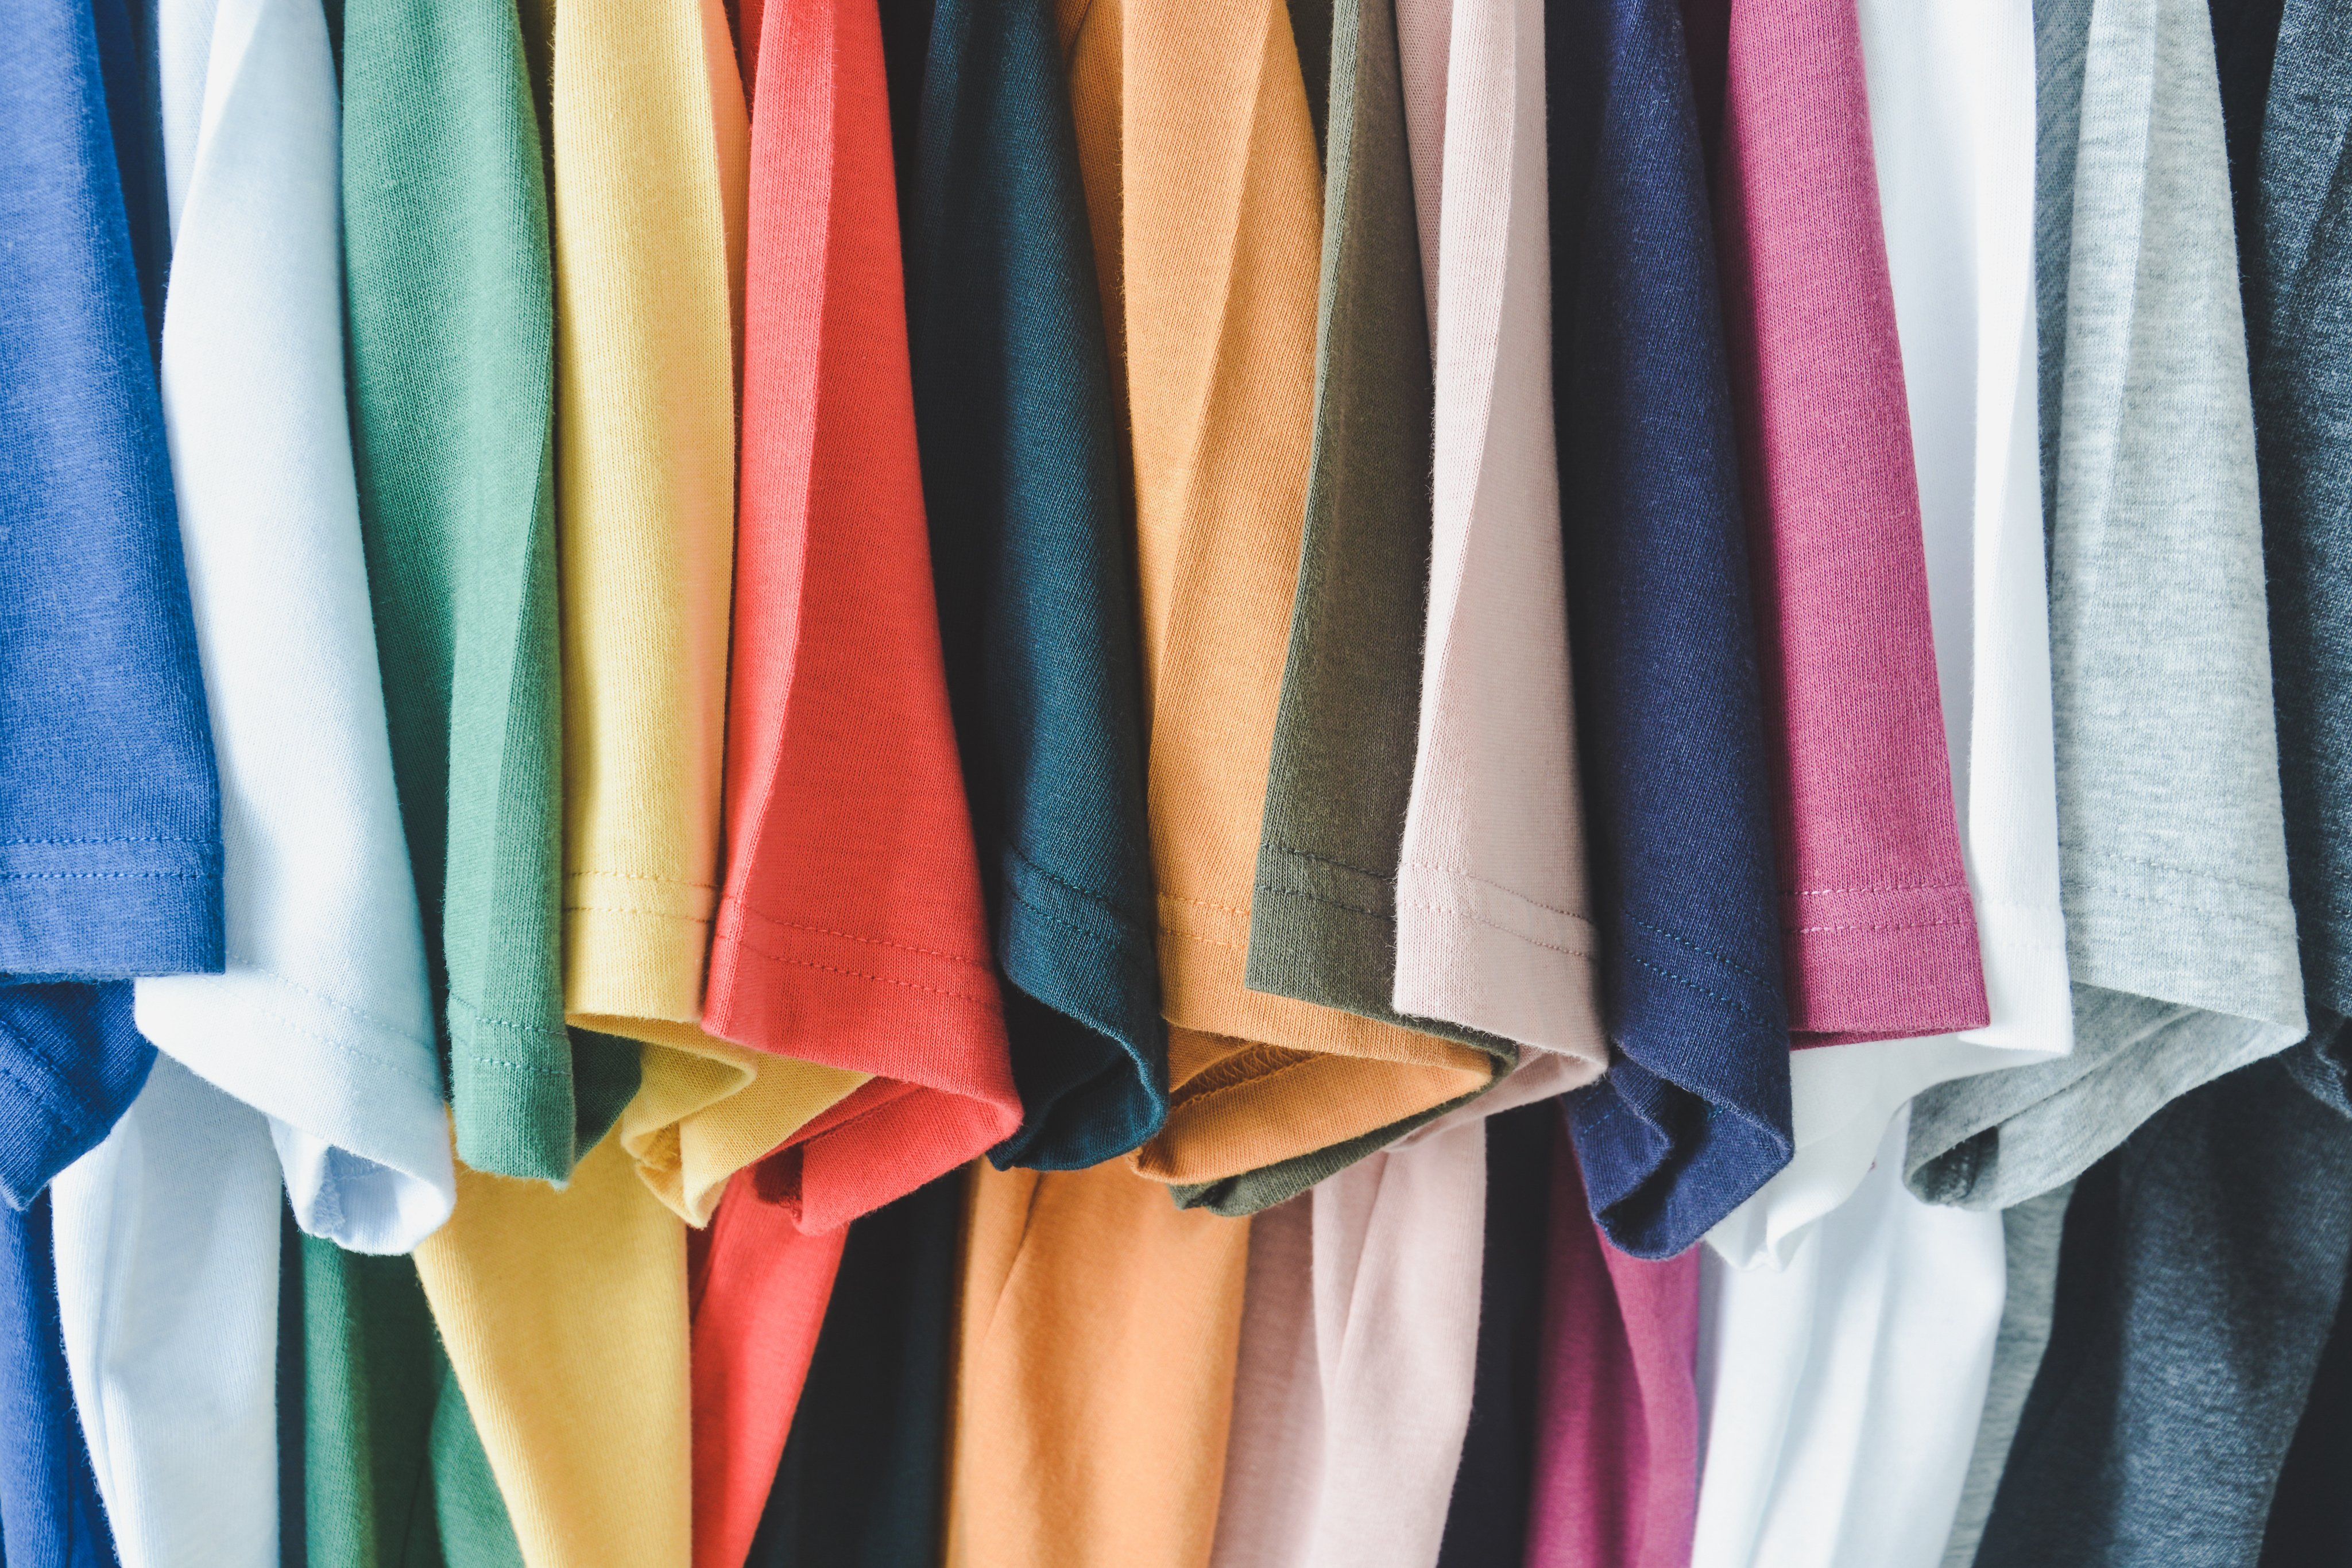 Short sleeve t-shirts of multiple colors including blue, green, yellow, red, orange, purple, pink, and gray, hang next to each other.